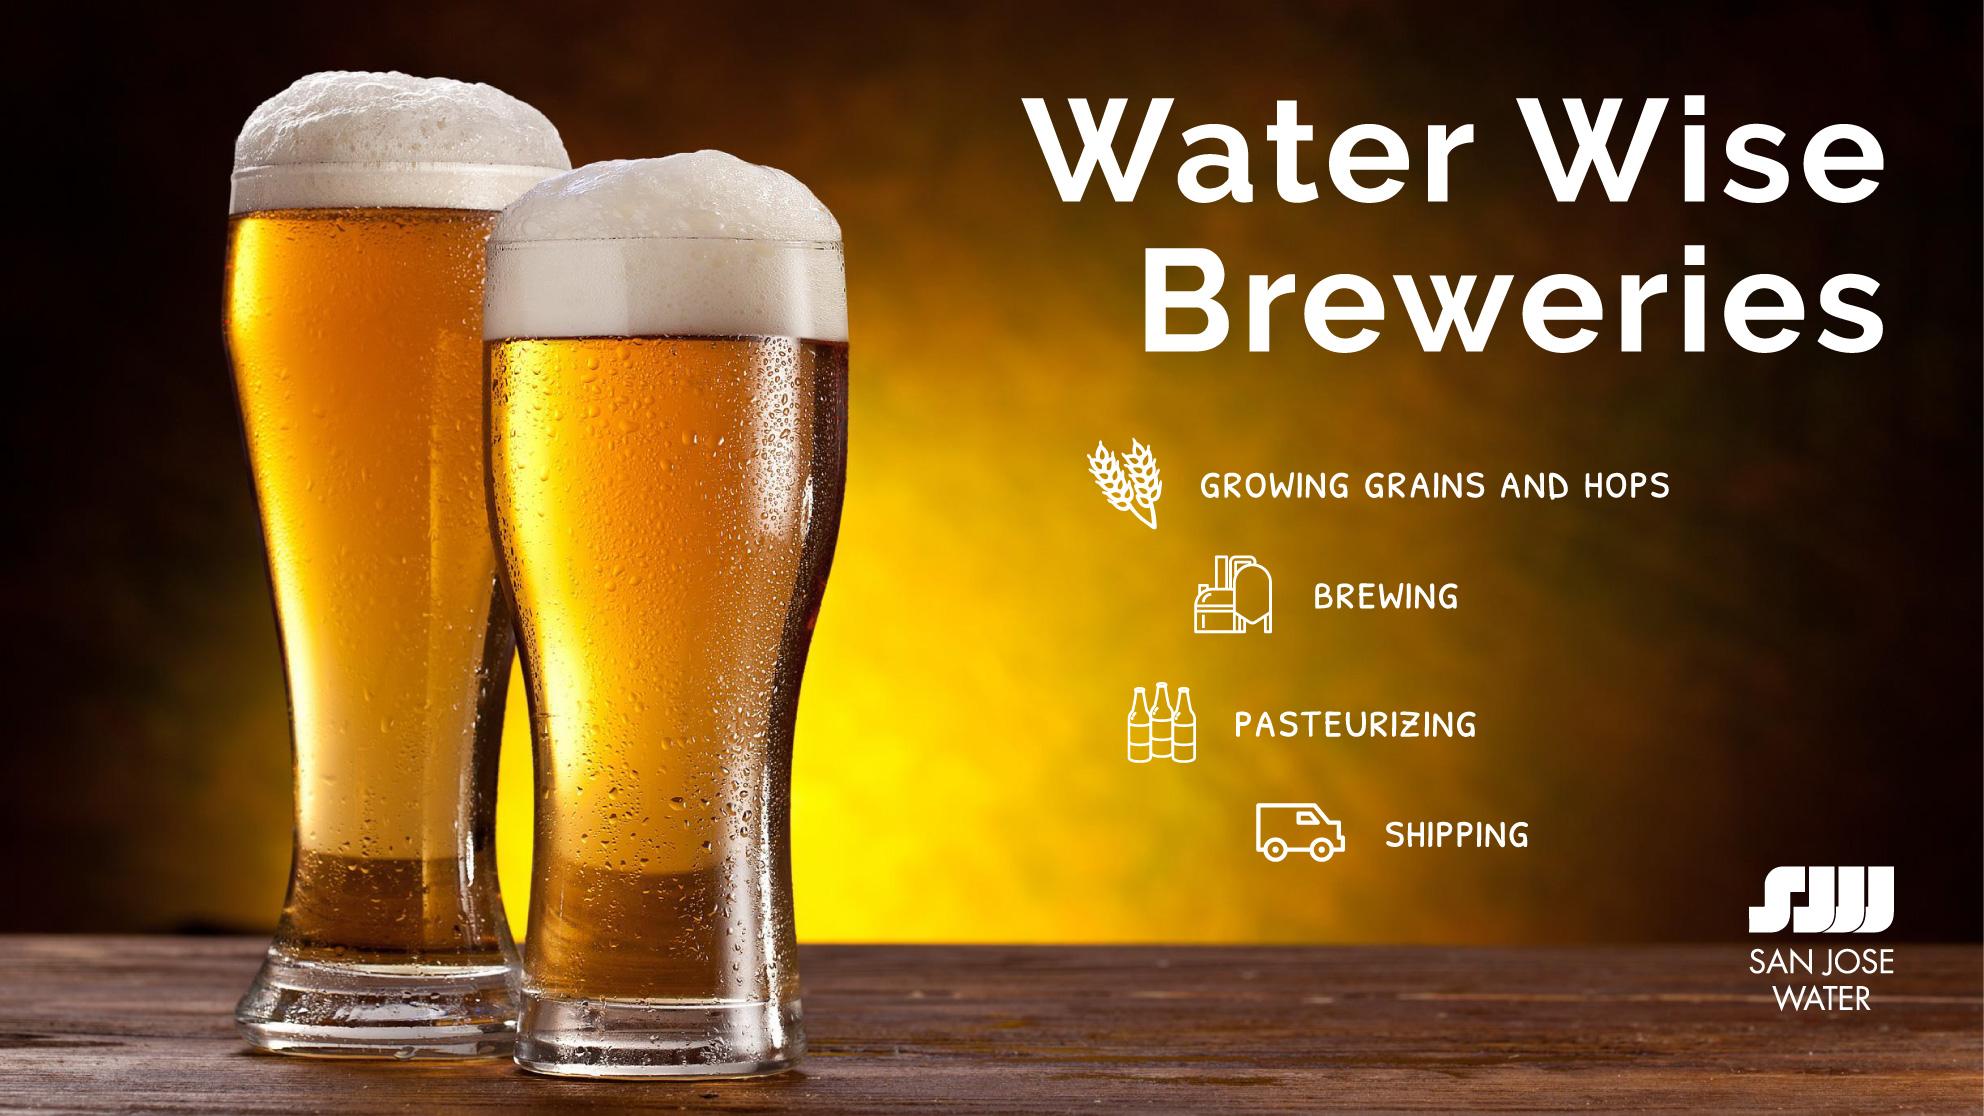 Water Wise Breweries in CA